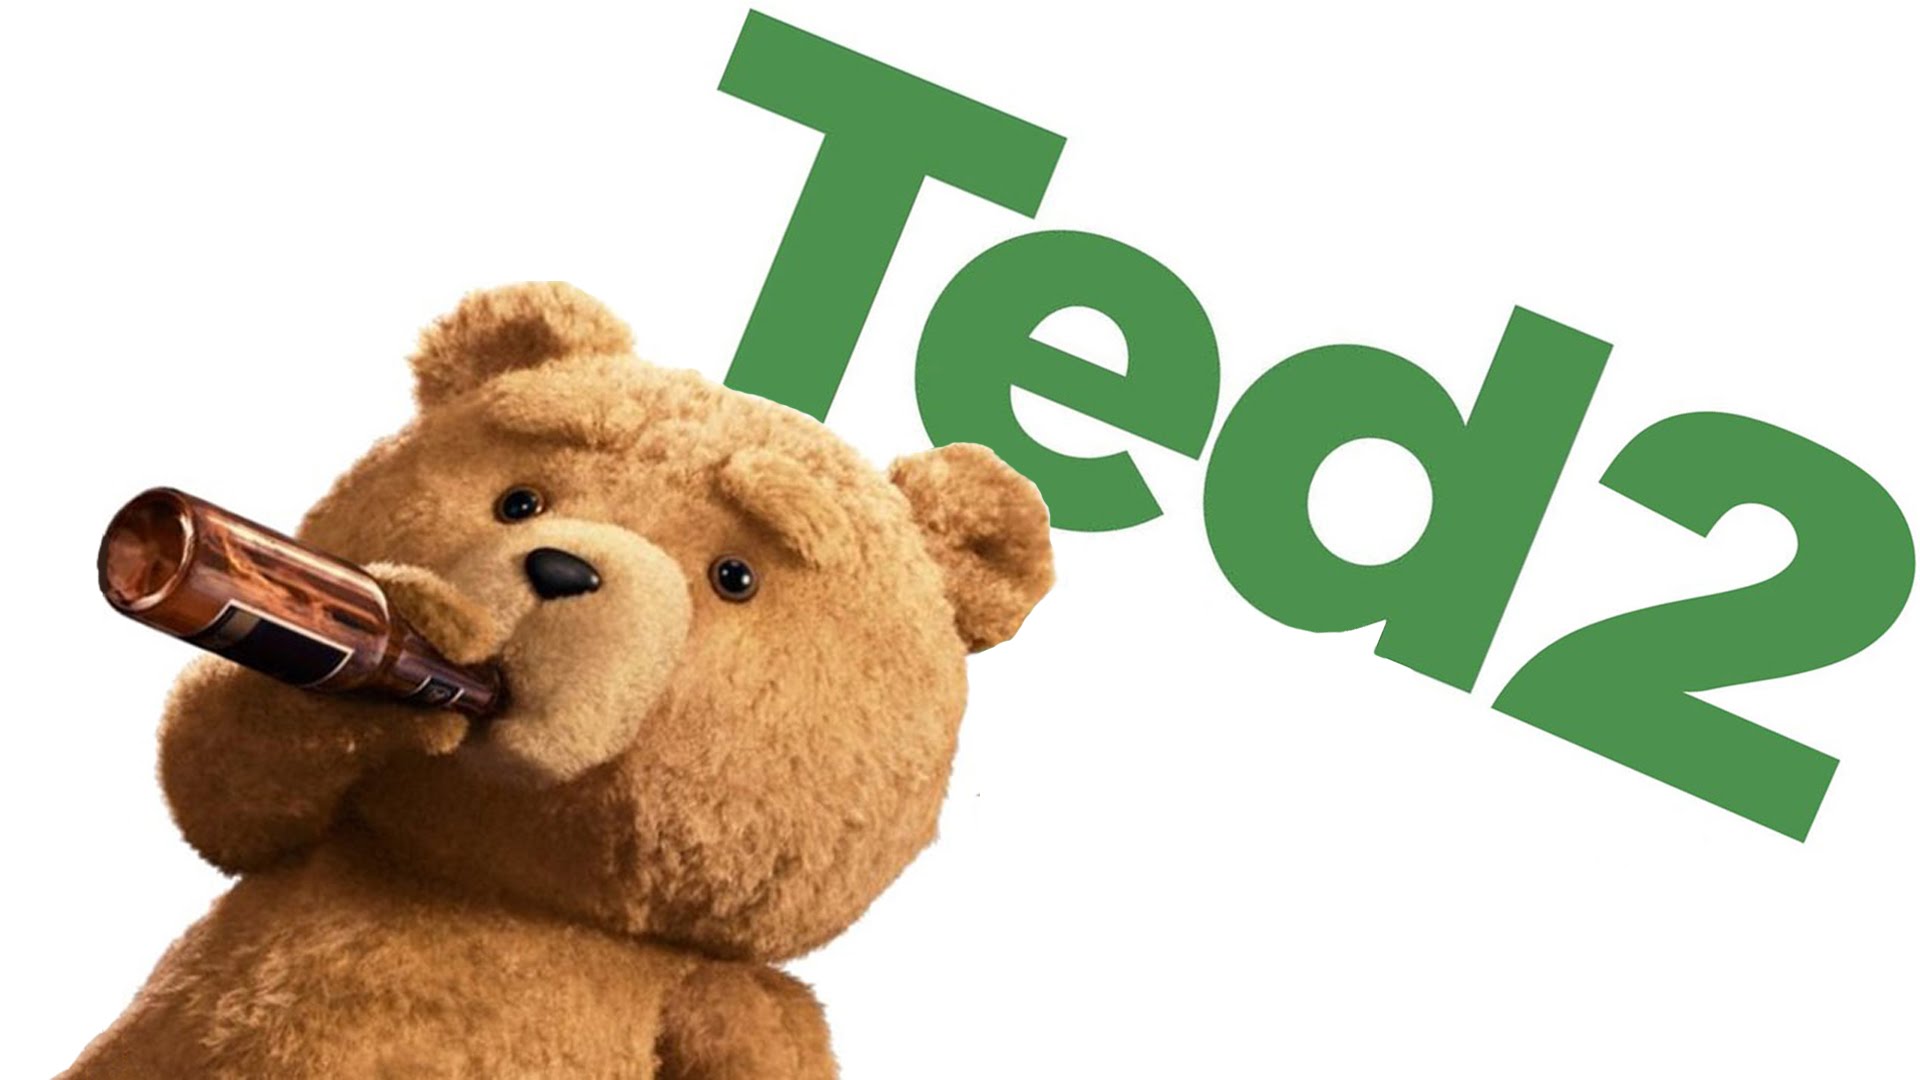 Ted 2 #18